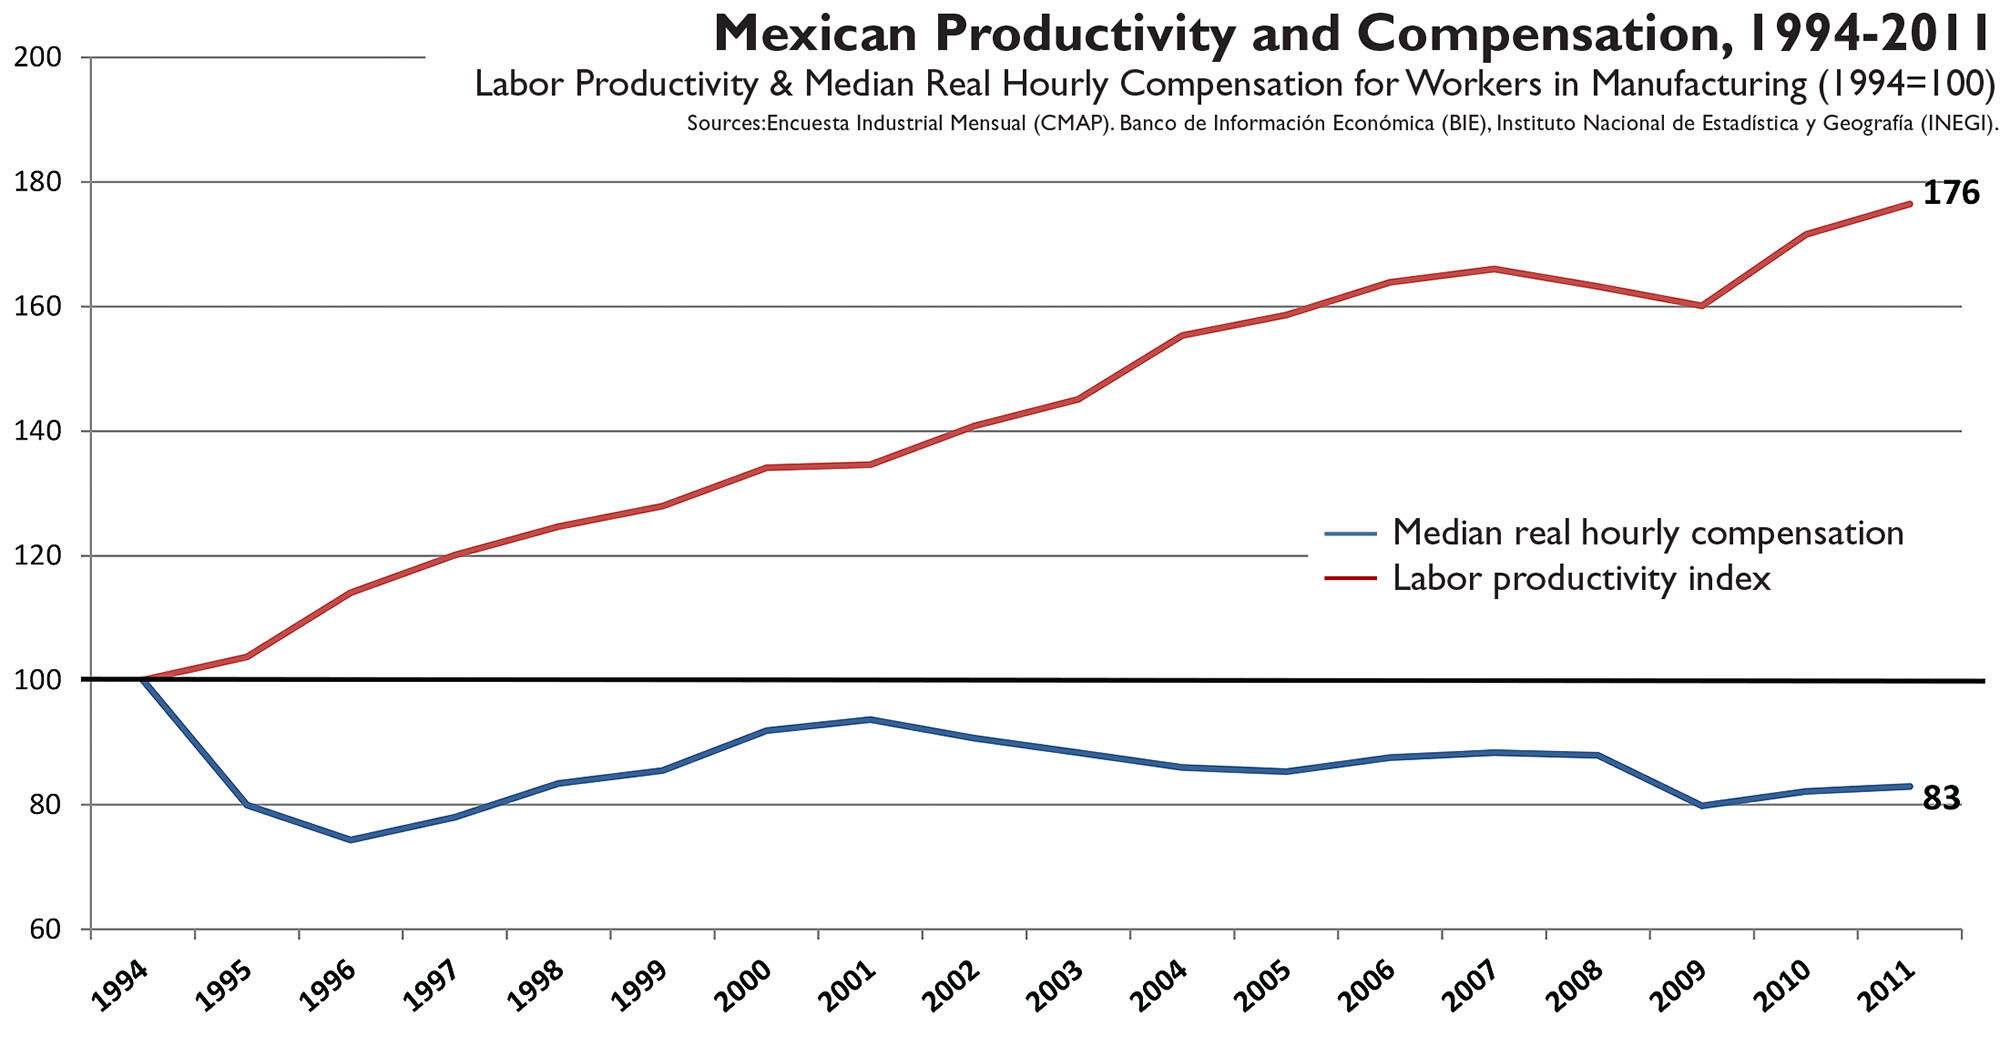 A chart shows the growing divide between Labor Productivity & Median Real Hourly Compensation for Workers in Mexican Manufacturing (1994=100) 